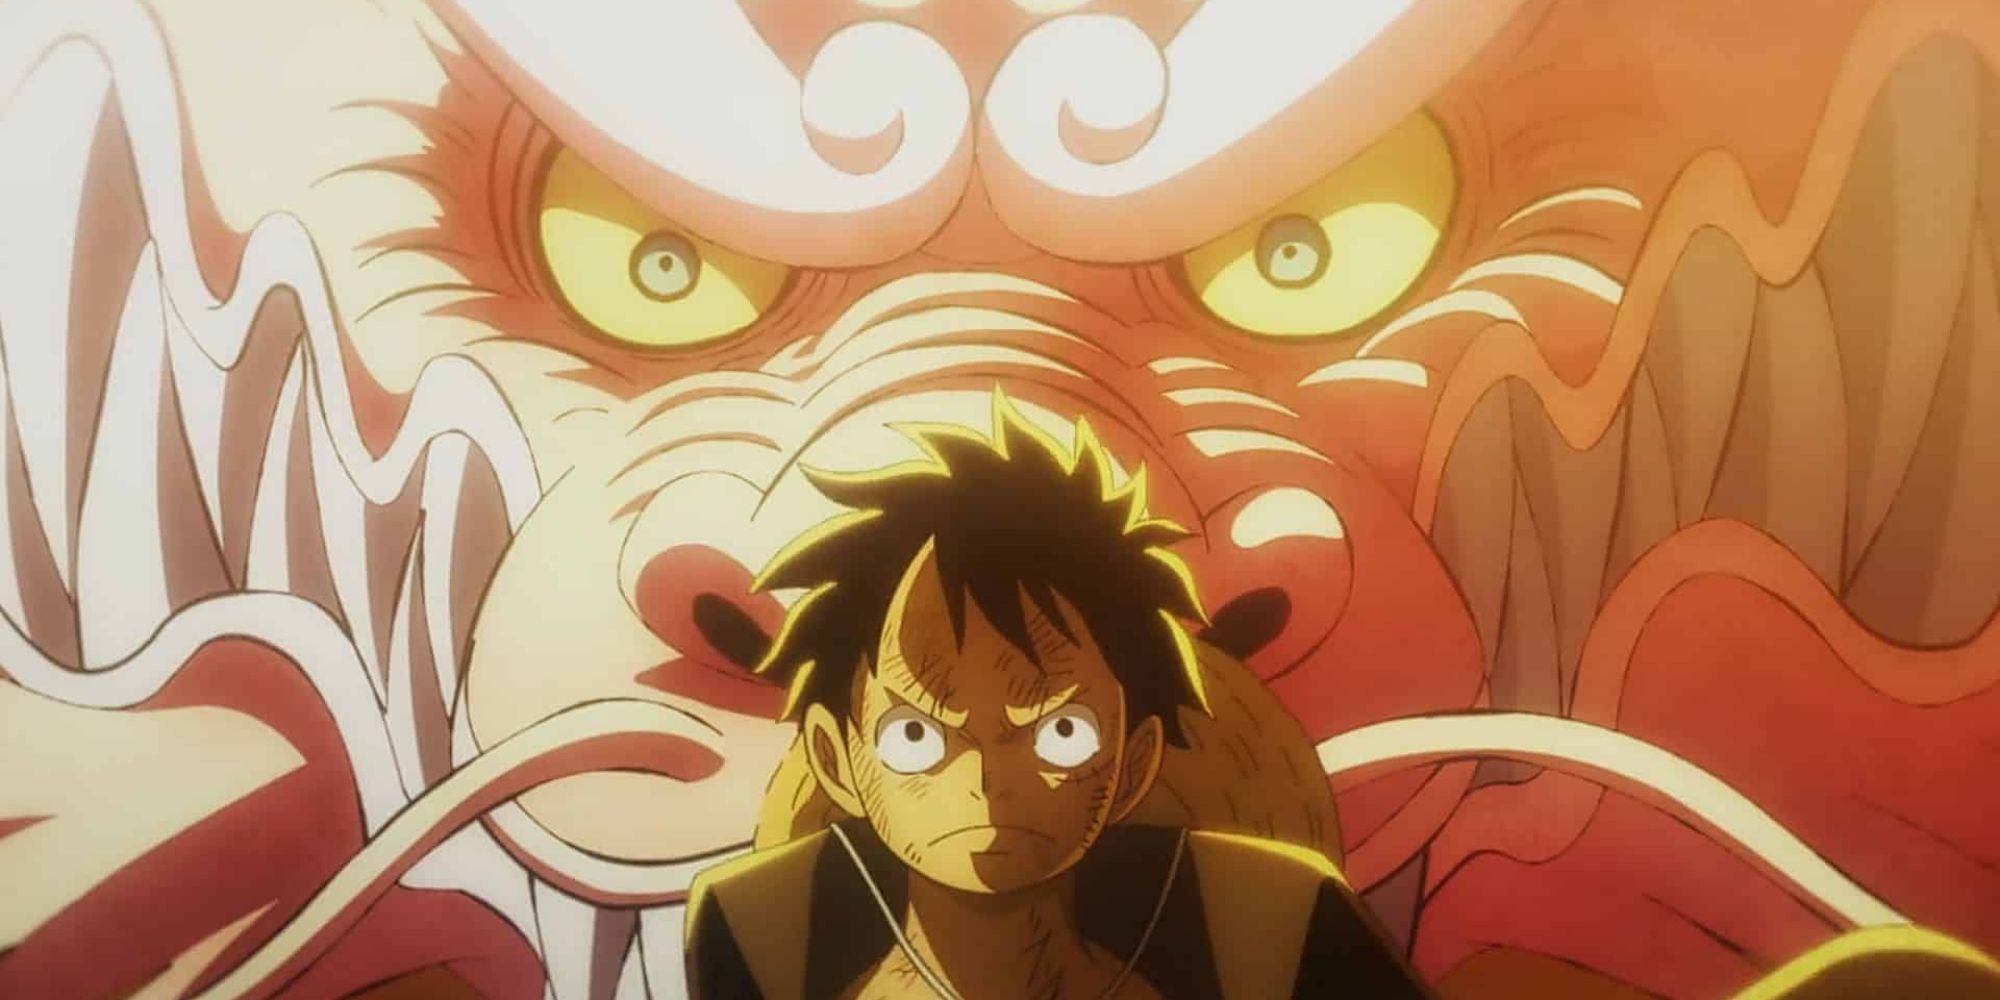 I started One Piece in March 2022. I watched episode 1052 today